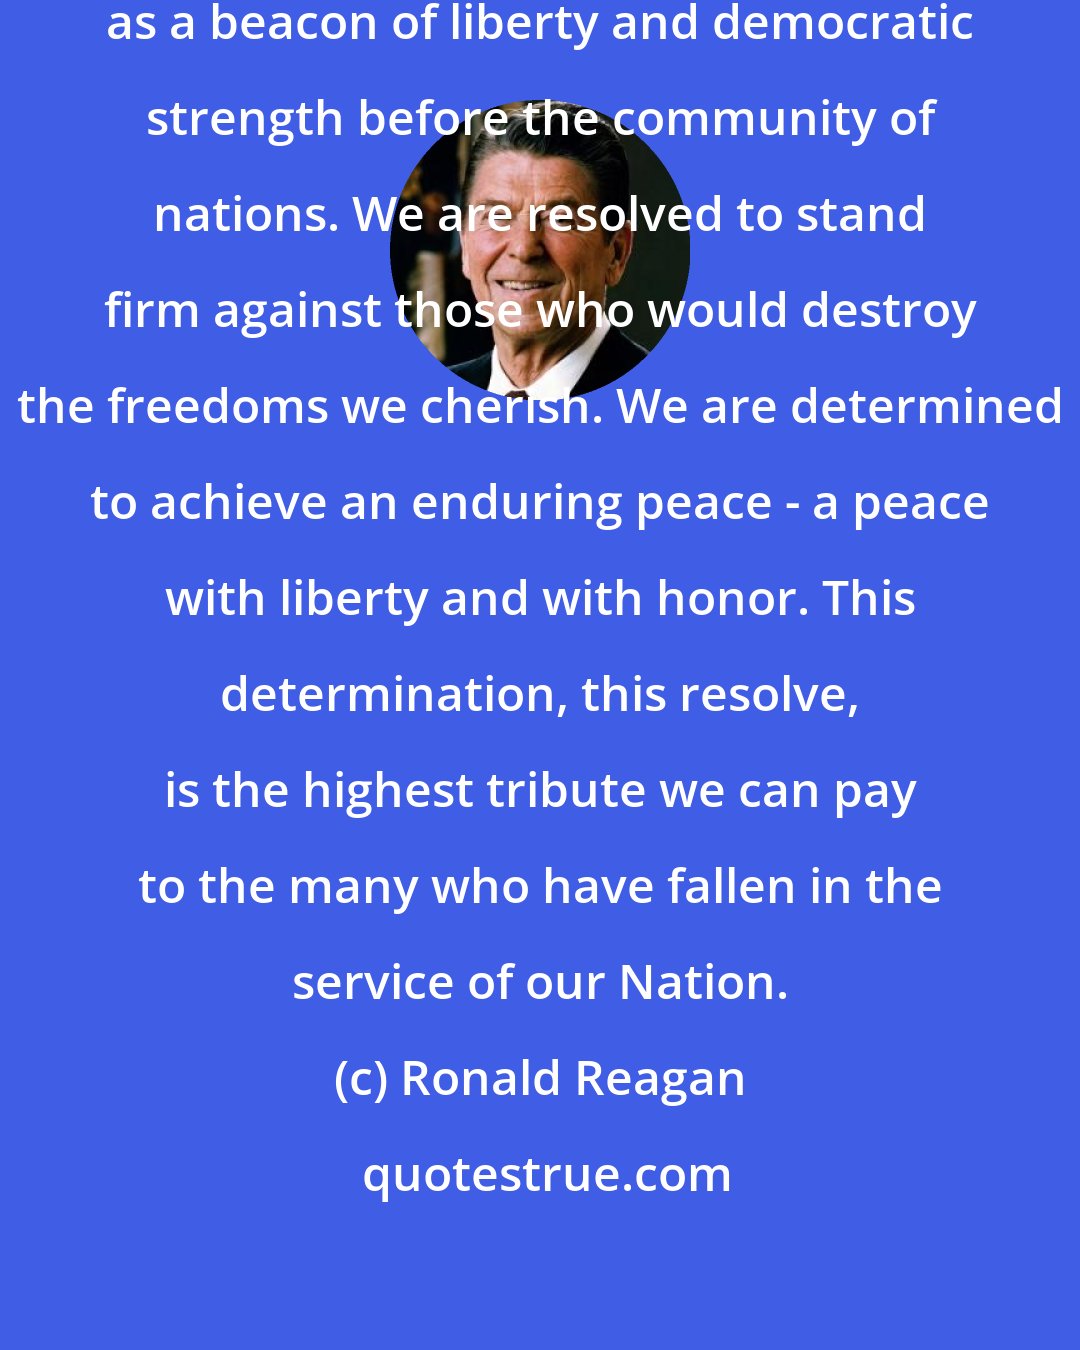 Ronald Reagan: Today, the United States stands as a beacon of liberty and democratic strength before the community of nations. We are resolved to stand firm against those who would destroy the freedoms we cherish. We are determined to achieve an enduring peace - a peace with liberty and with honor. This determination, this resolve, is the highest tribute we can pay to the many who have fallen in the service of our Nation.